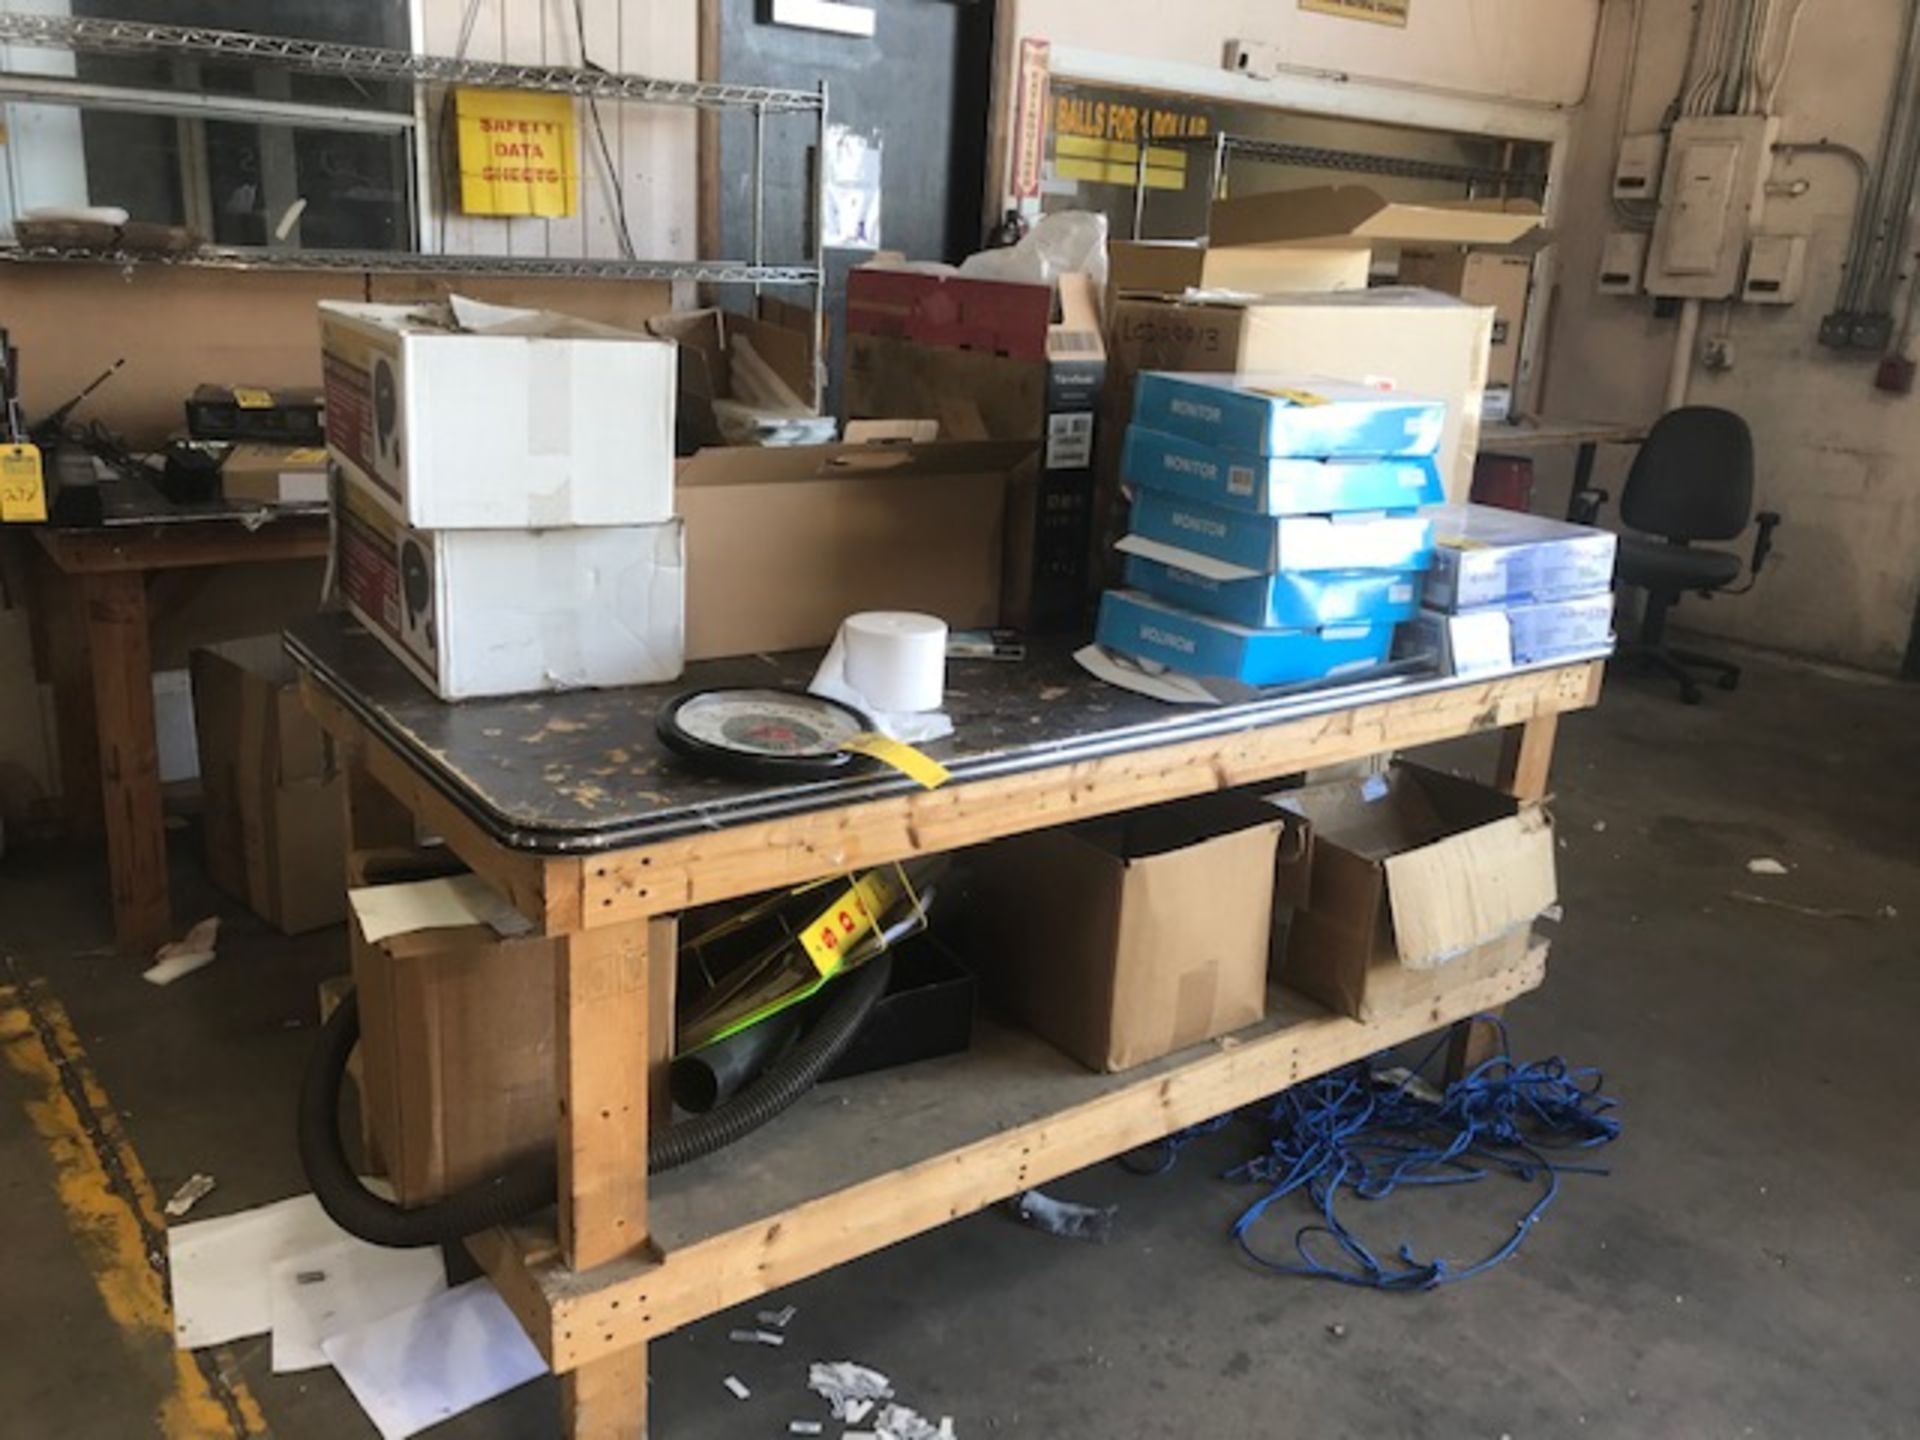 WORK TABLES WITH CONTENTS UNDER TABLES - ELECTRONICS, PARTS, ETC